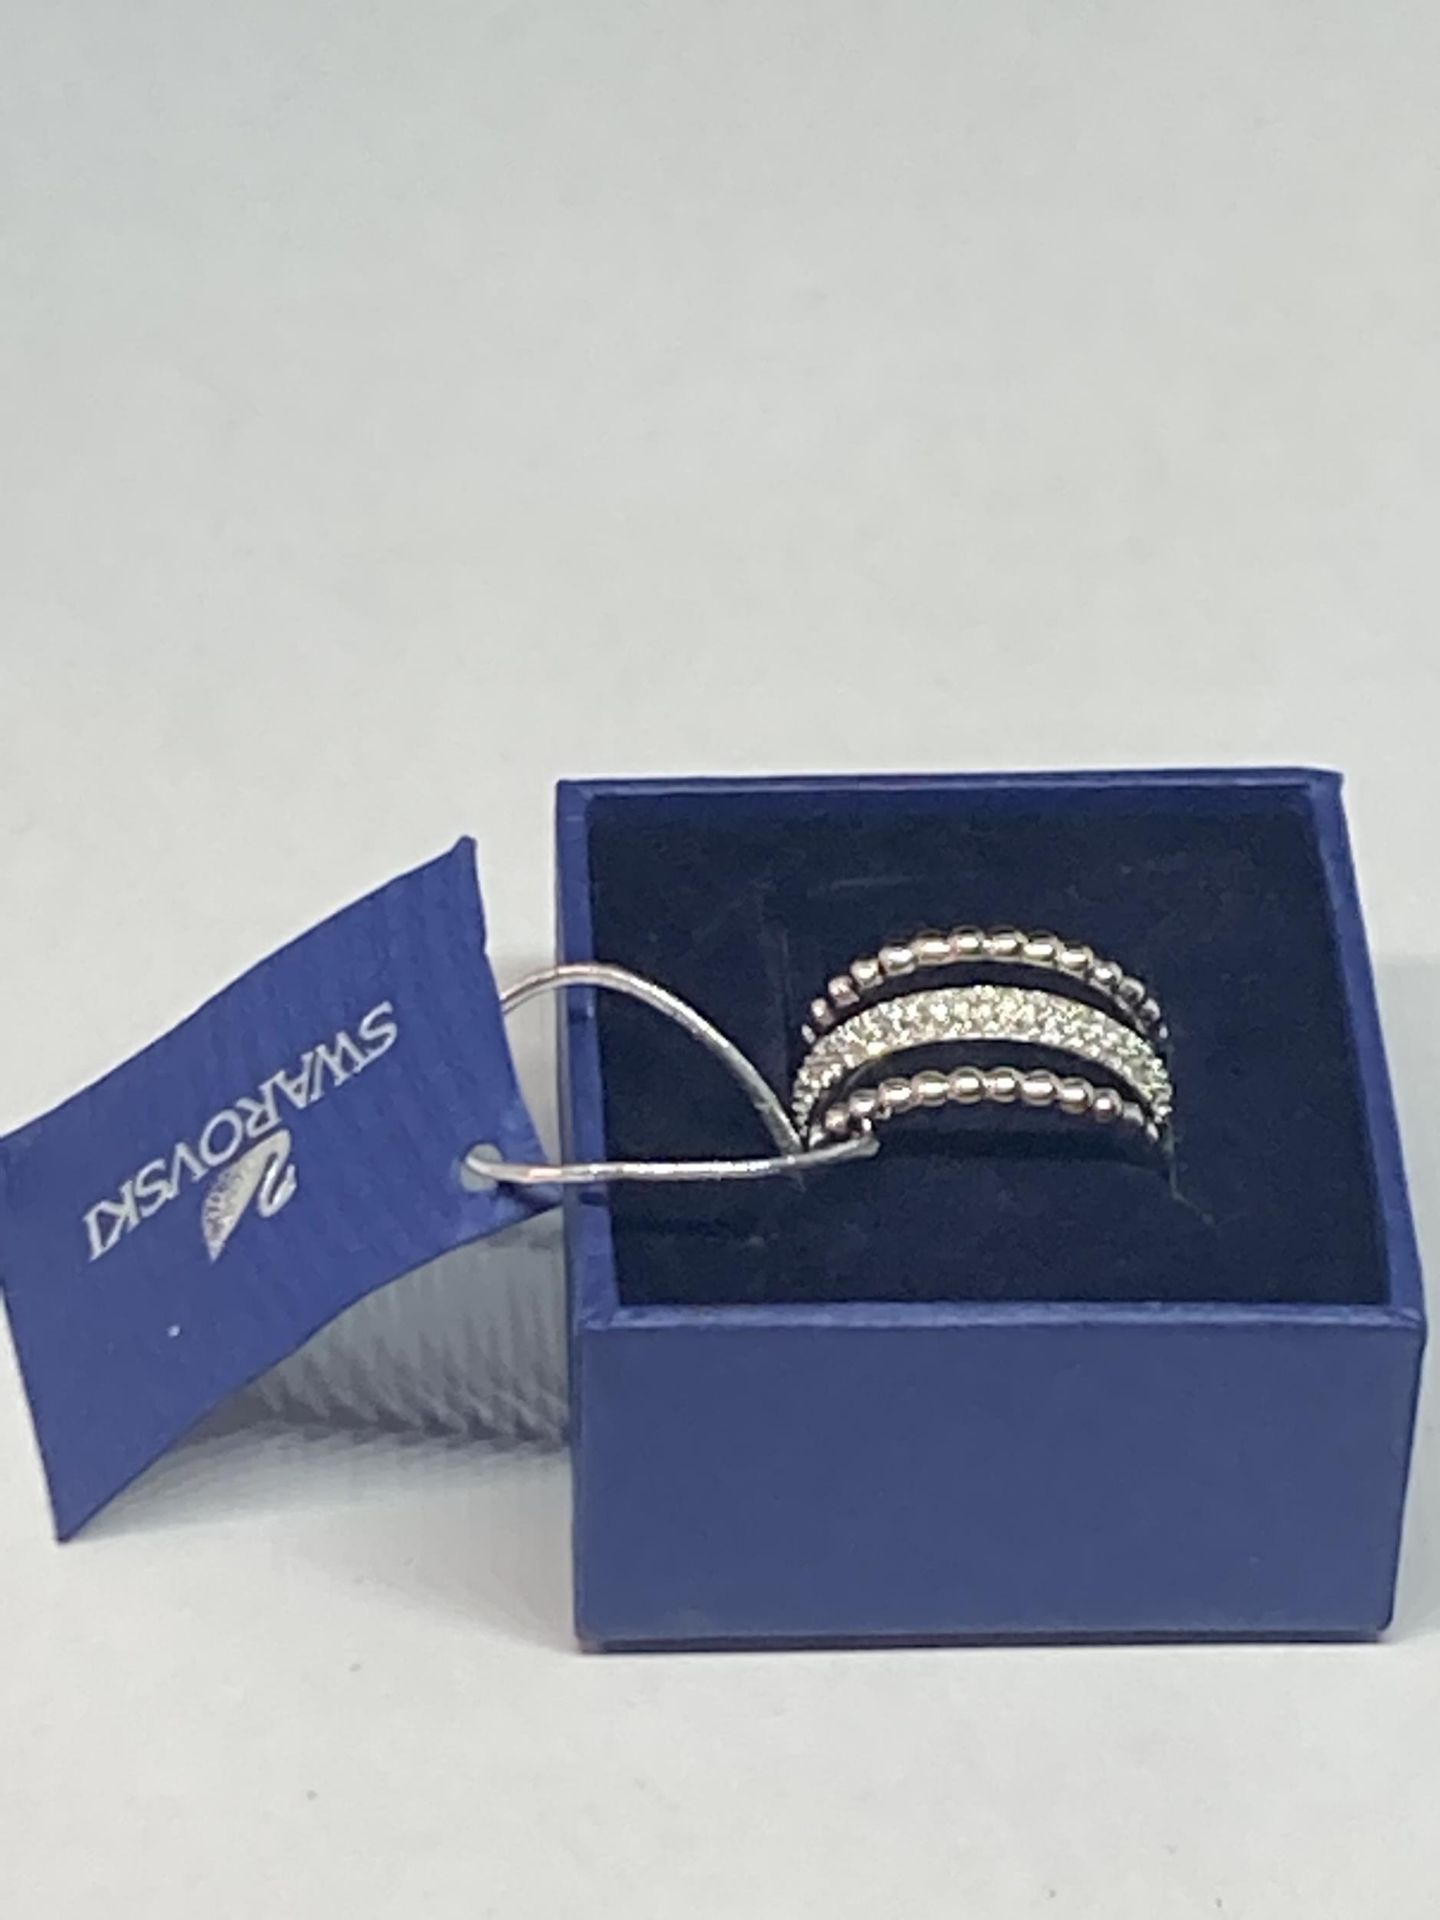 A SWAROVSKI CRYSTAL RING SIZE Q/R WITH LABEL AND PRESENTATION BOX